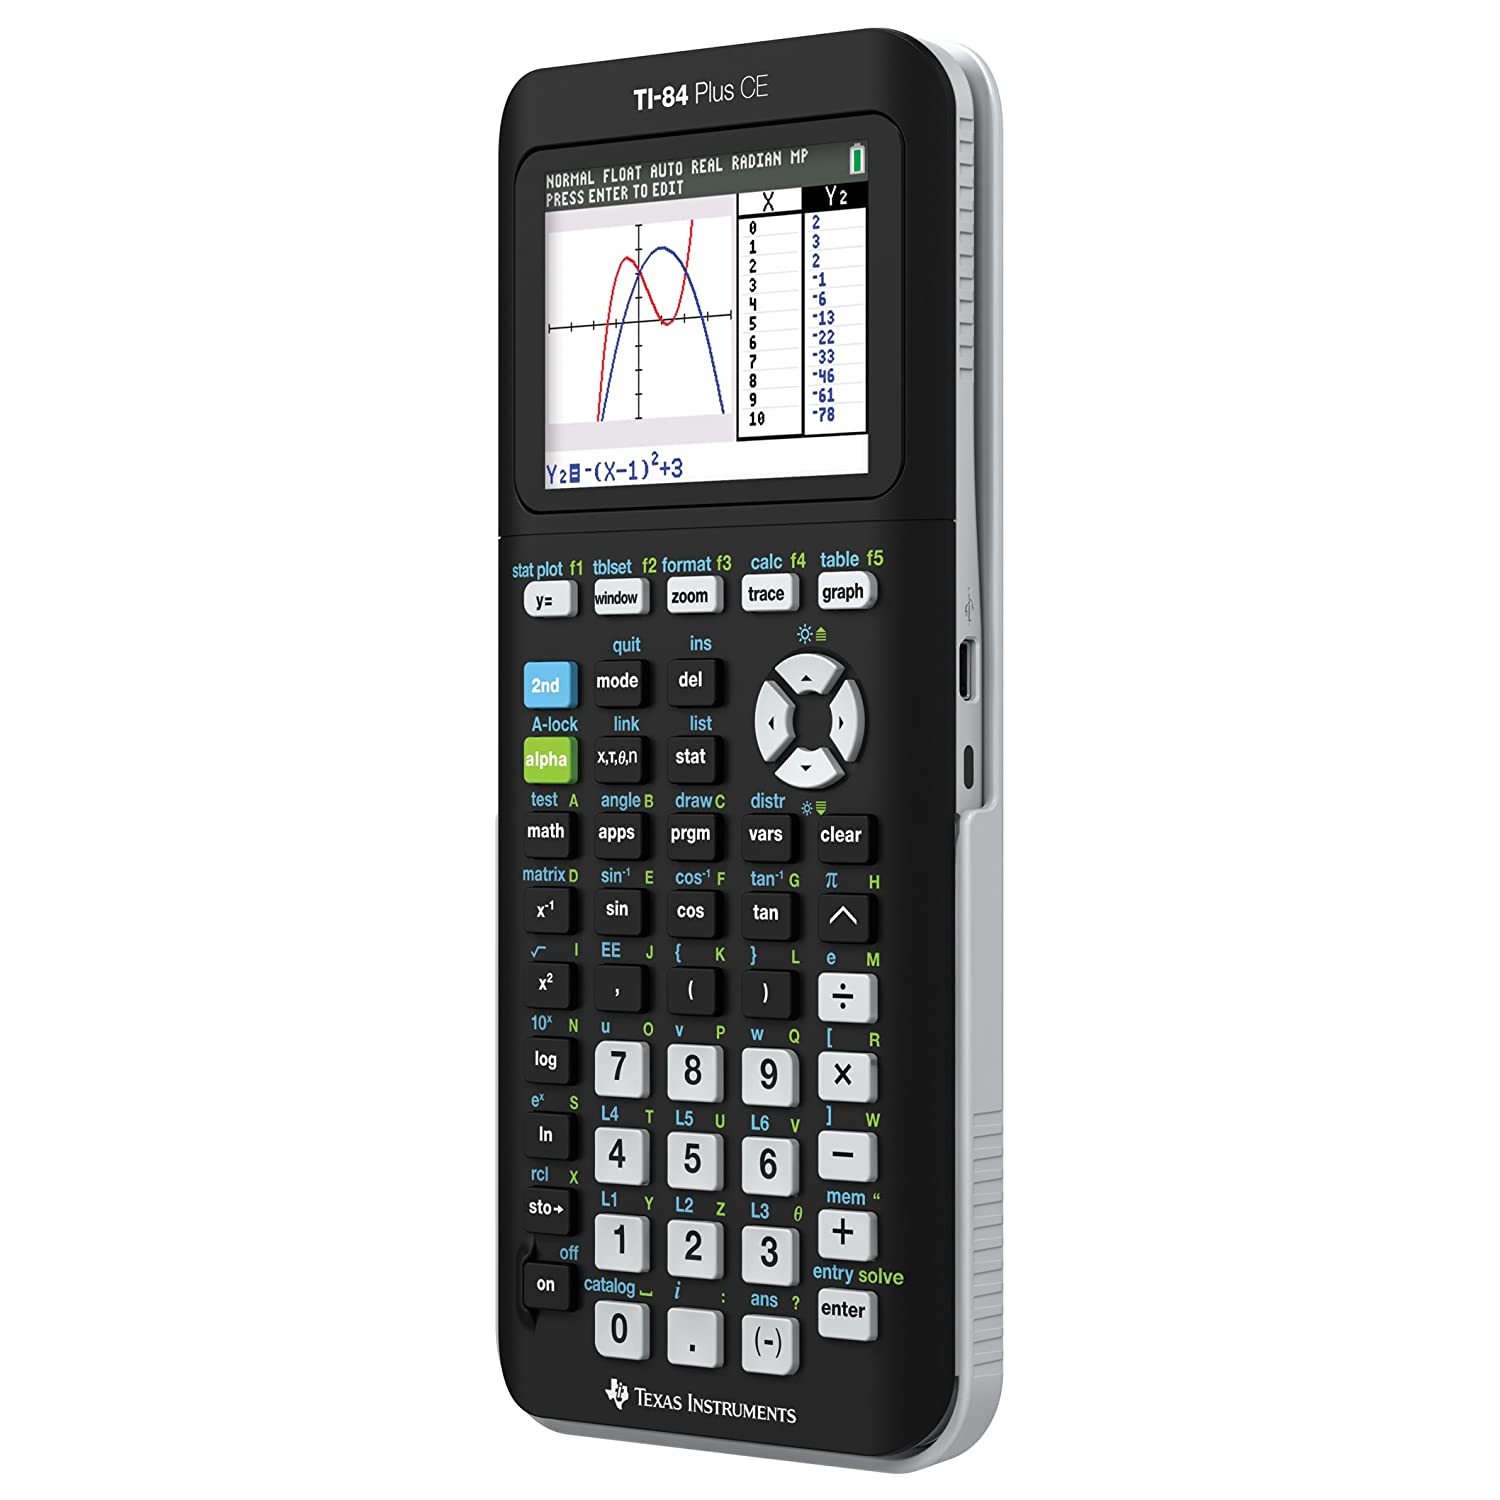 Texas Instruments TI-84 Plus CE Graphing Calculator, Black - image 2 of 5